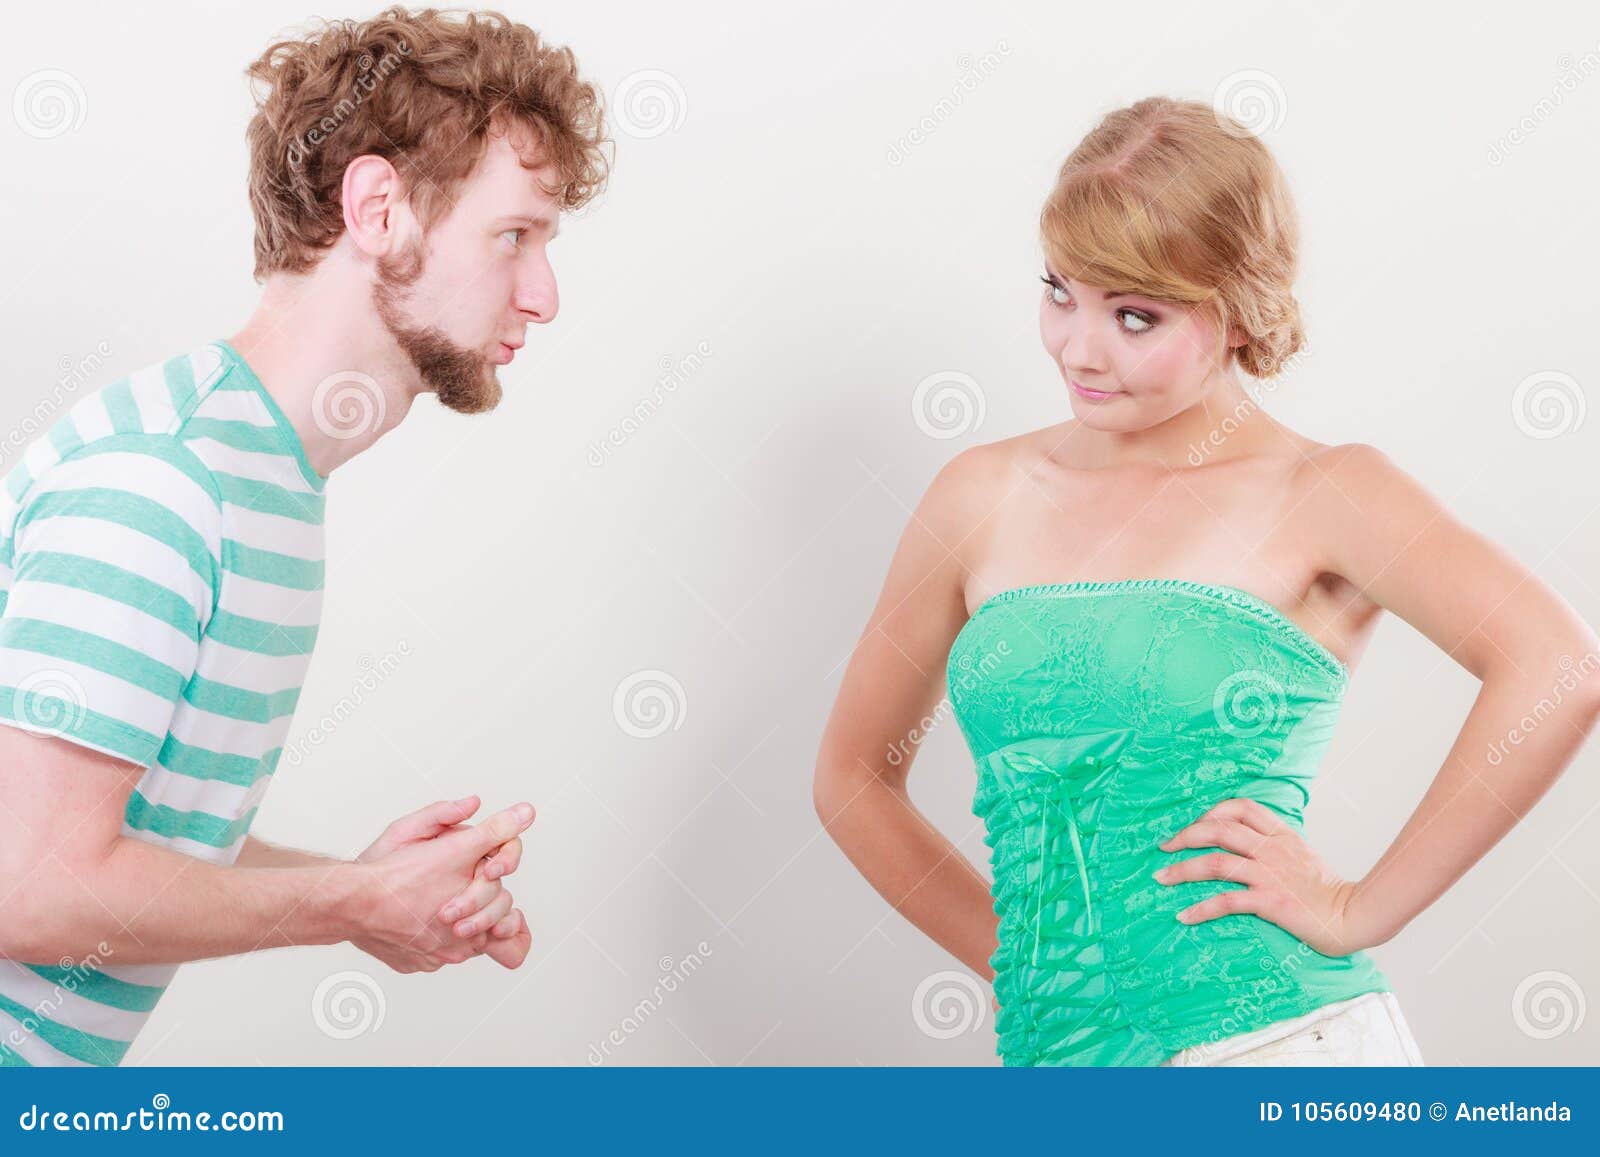 man asking for forgivness. conflicted couple.